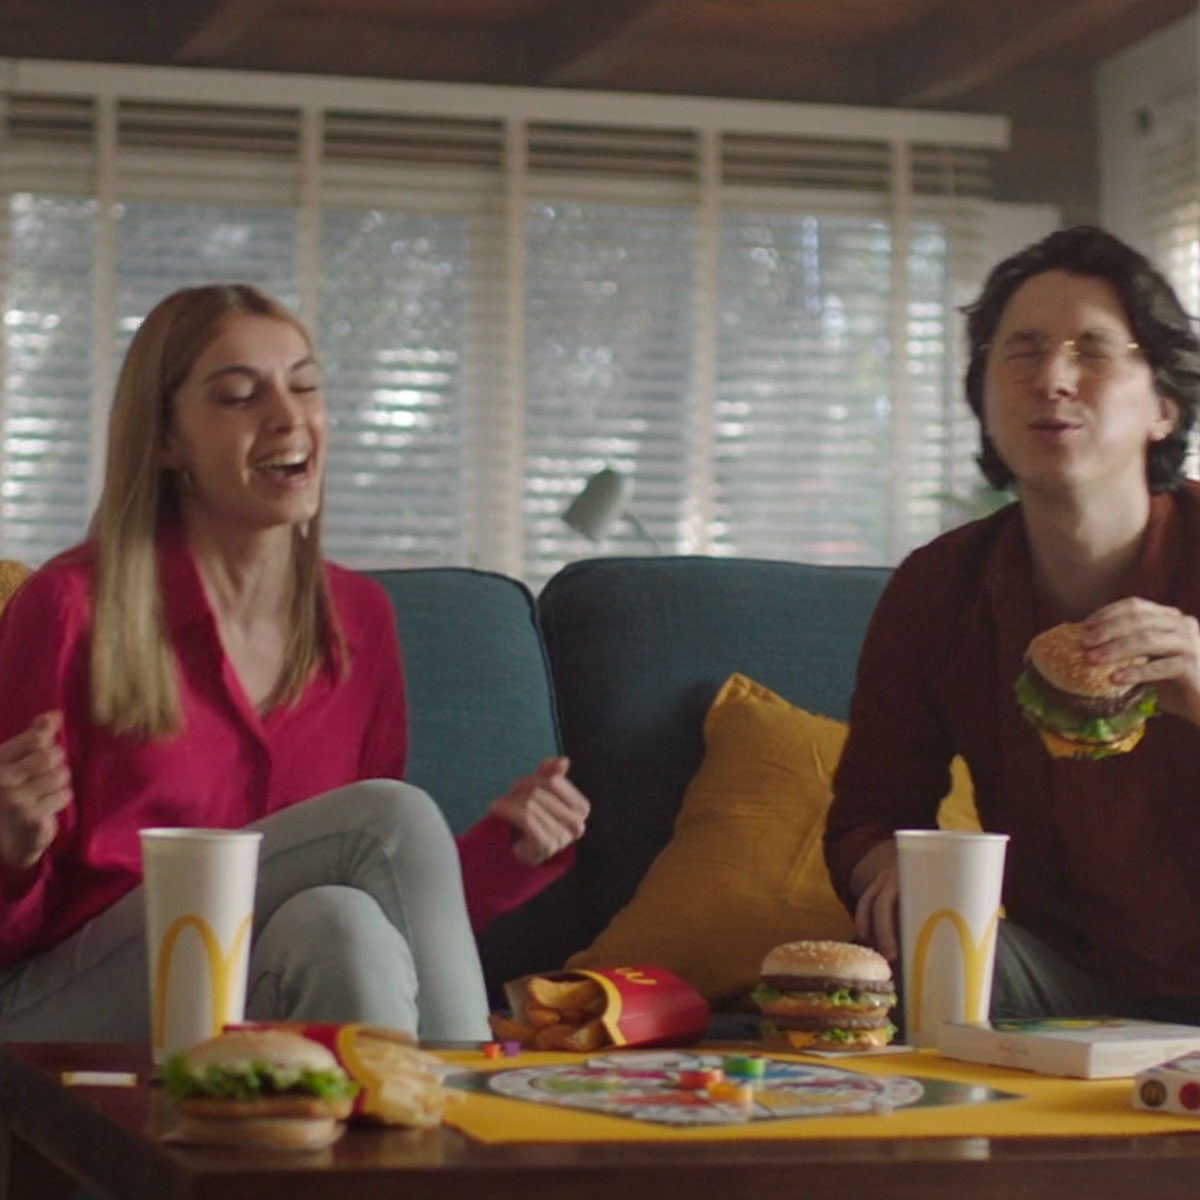 McDonald's Commercial by Christopher Cartagena 06